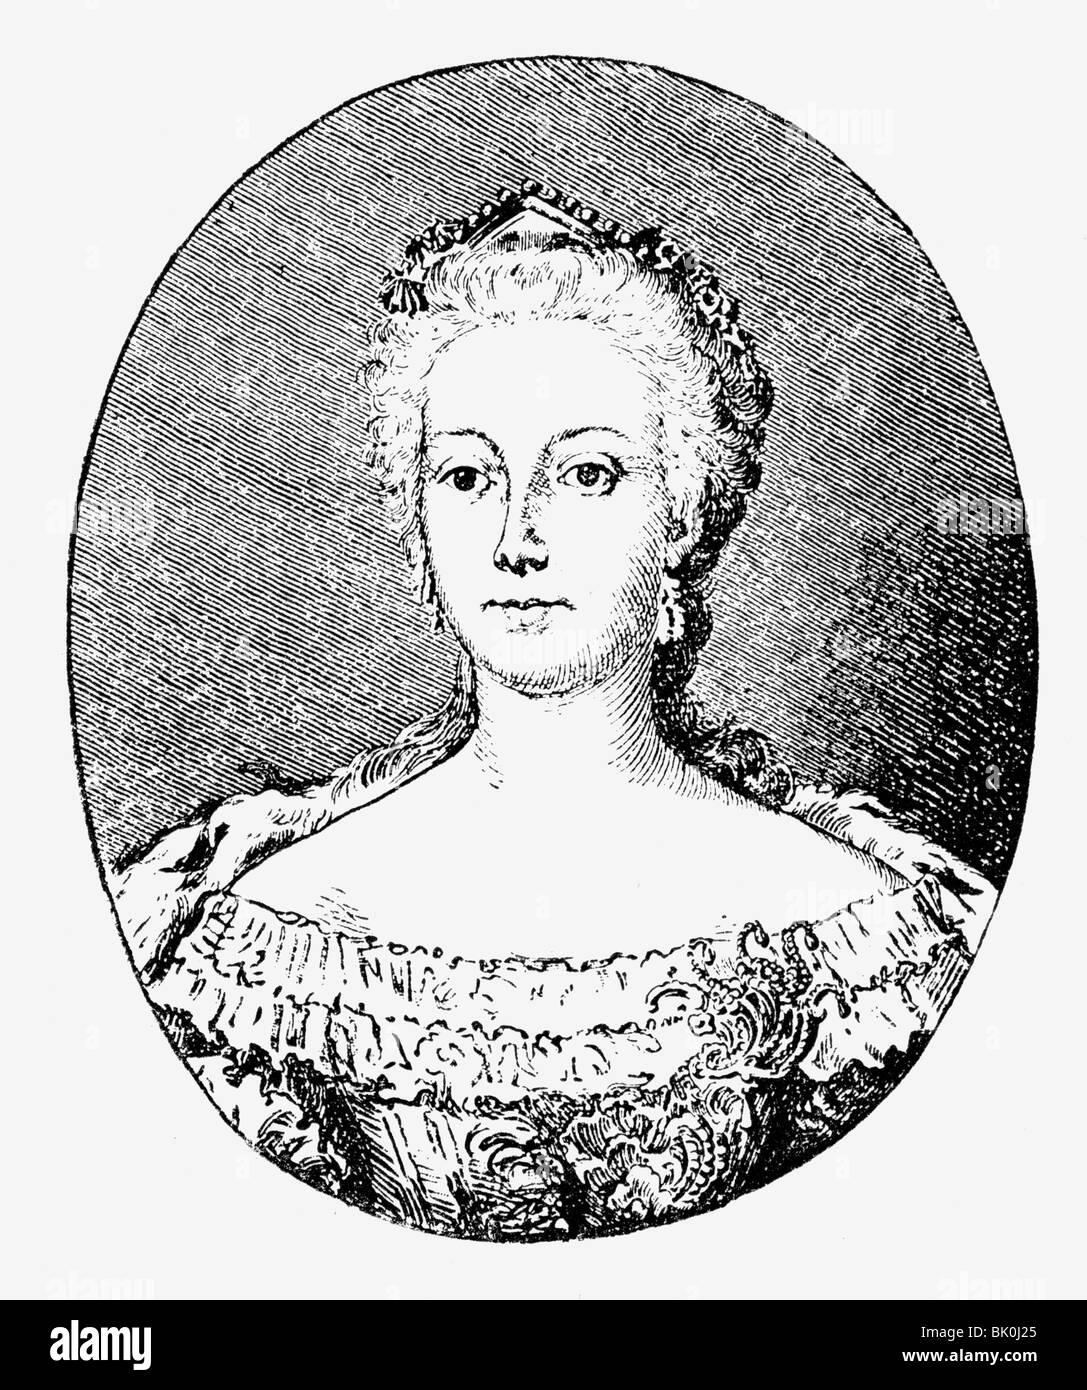 Elisabeth Christine, 8.11.1715 - 13.1.1797, Queen Consort of Prussia 31.5.1740 - 17.8.1786, portrait, wood engraving, 19th century, , Stock Photo